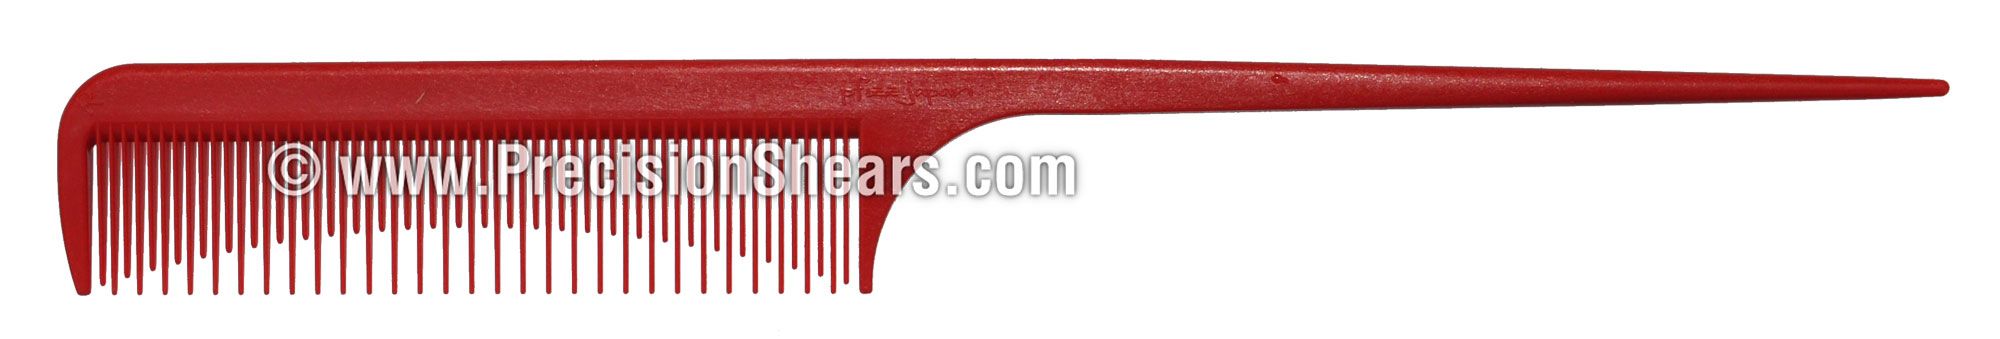 PFIZZ Ring Tail Comb Red 